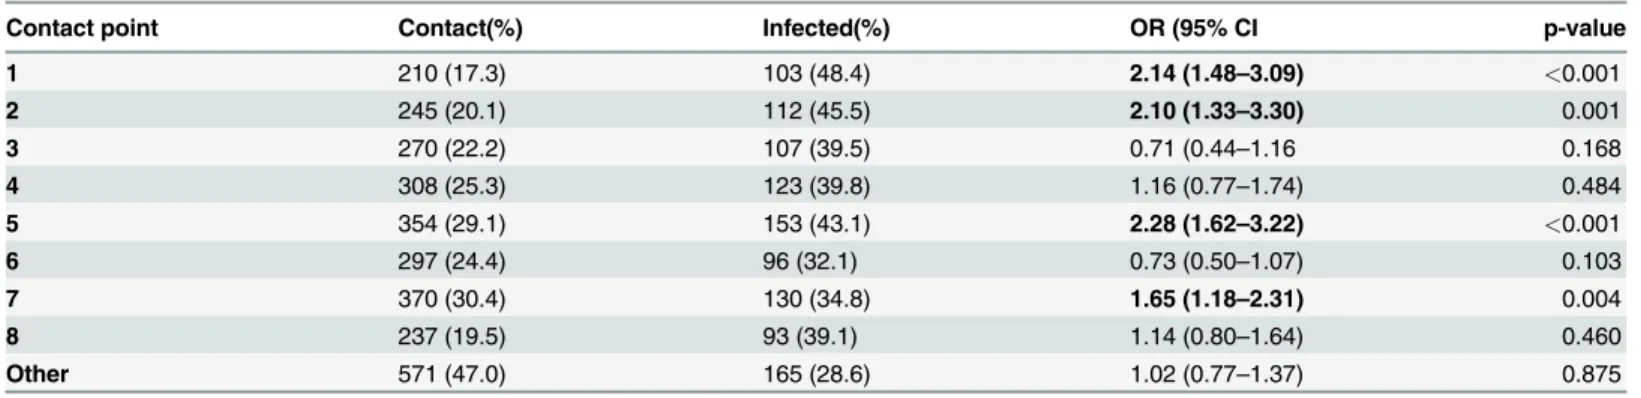 Table 3. Risk at contact points for S . mansoni infection.